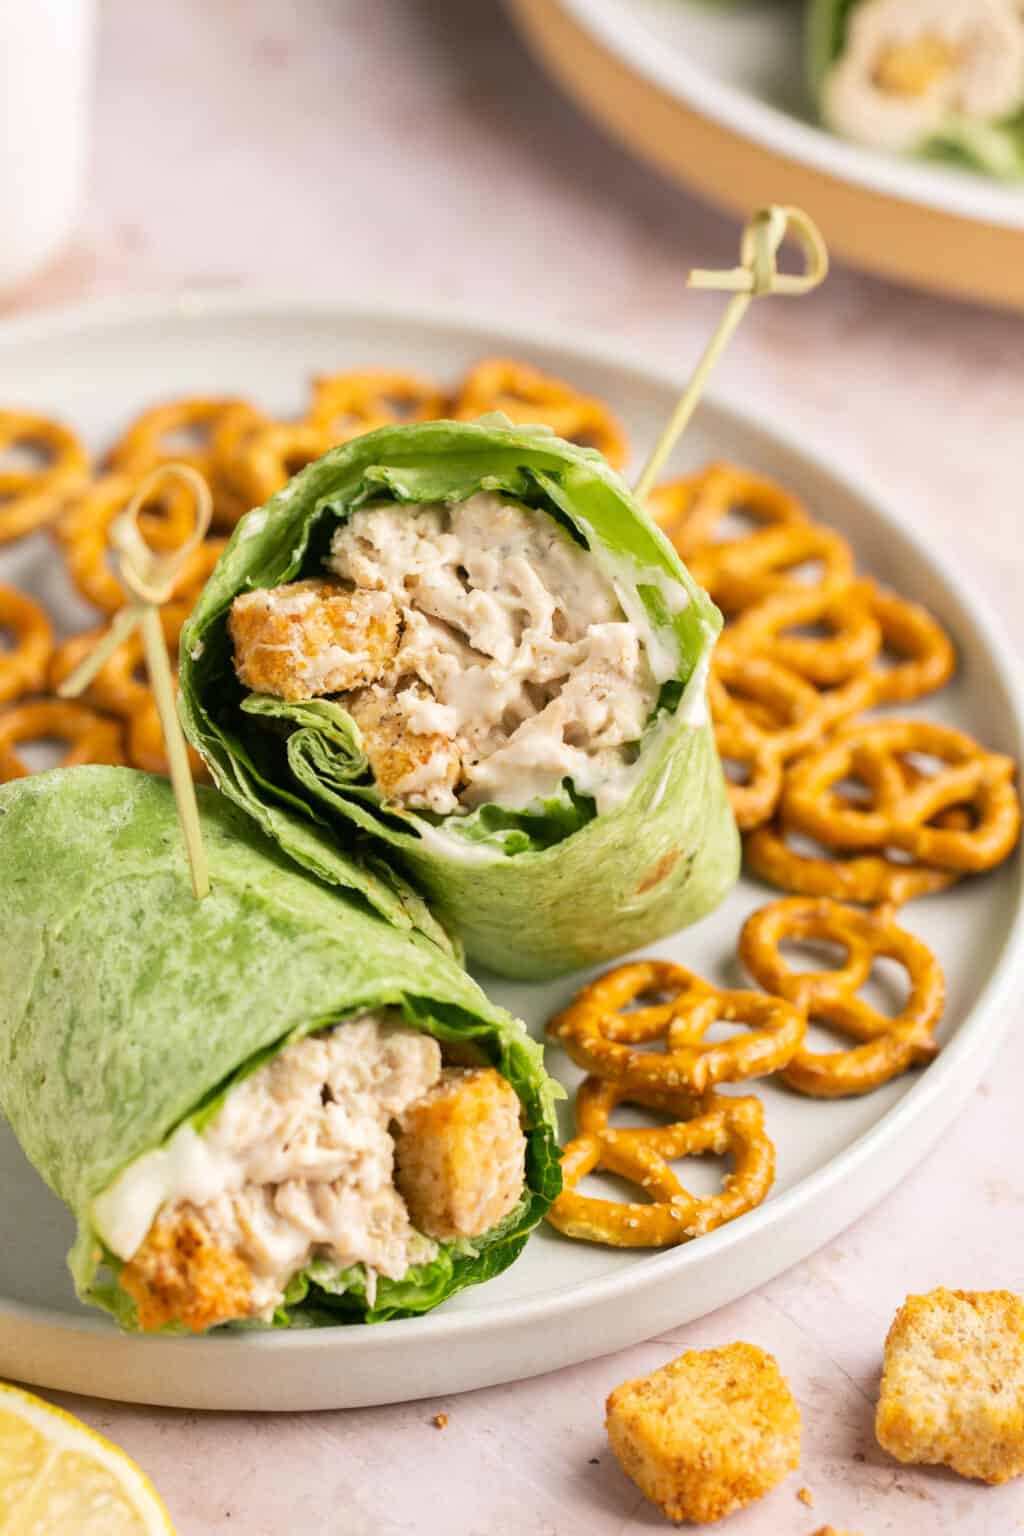 best healthy wrap recipes to lose weight
